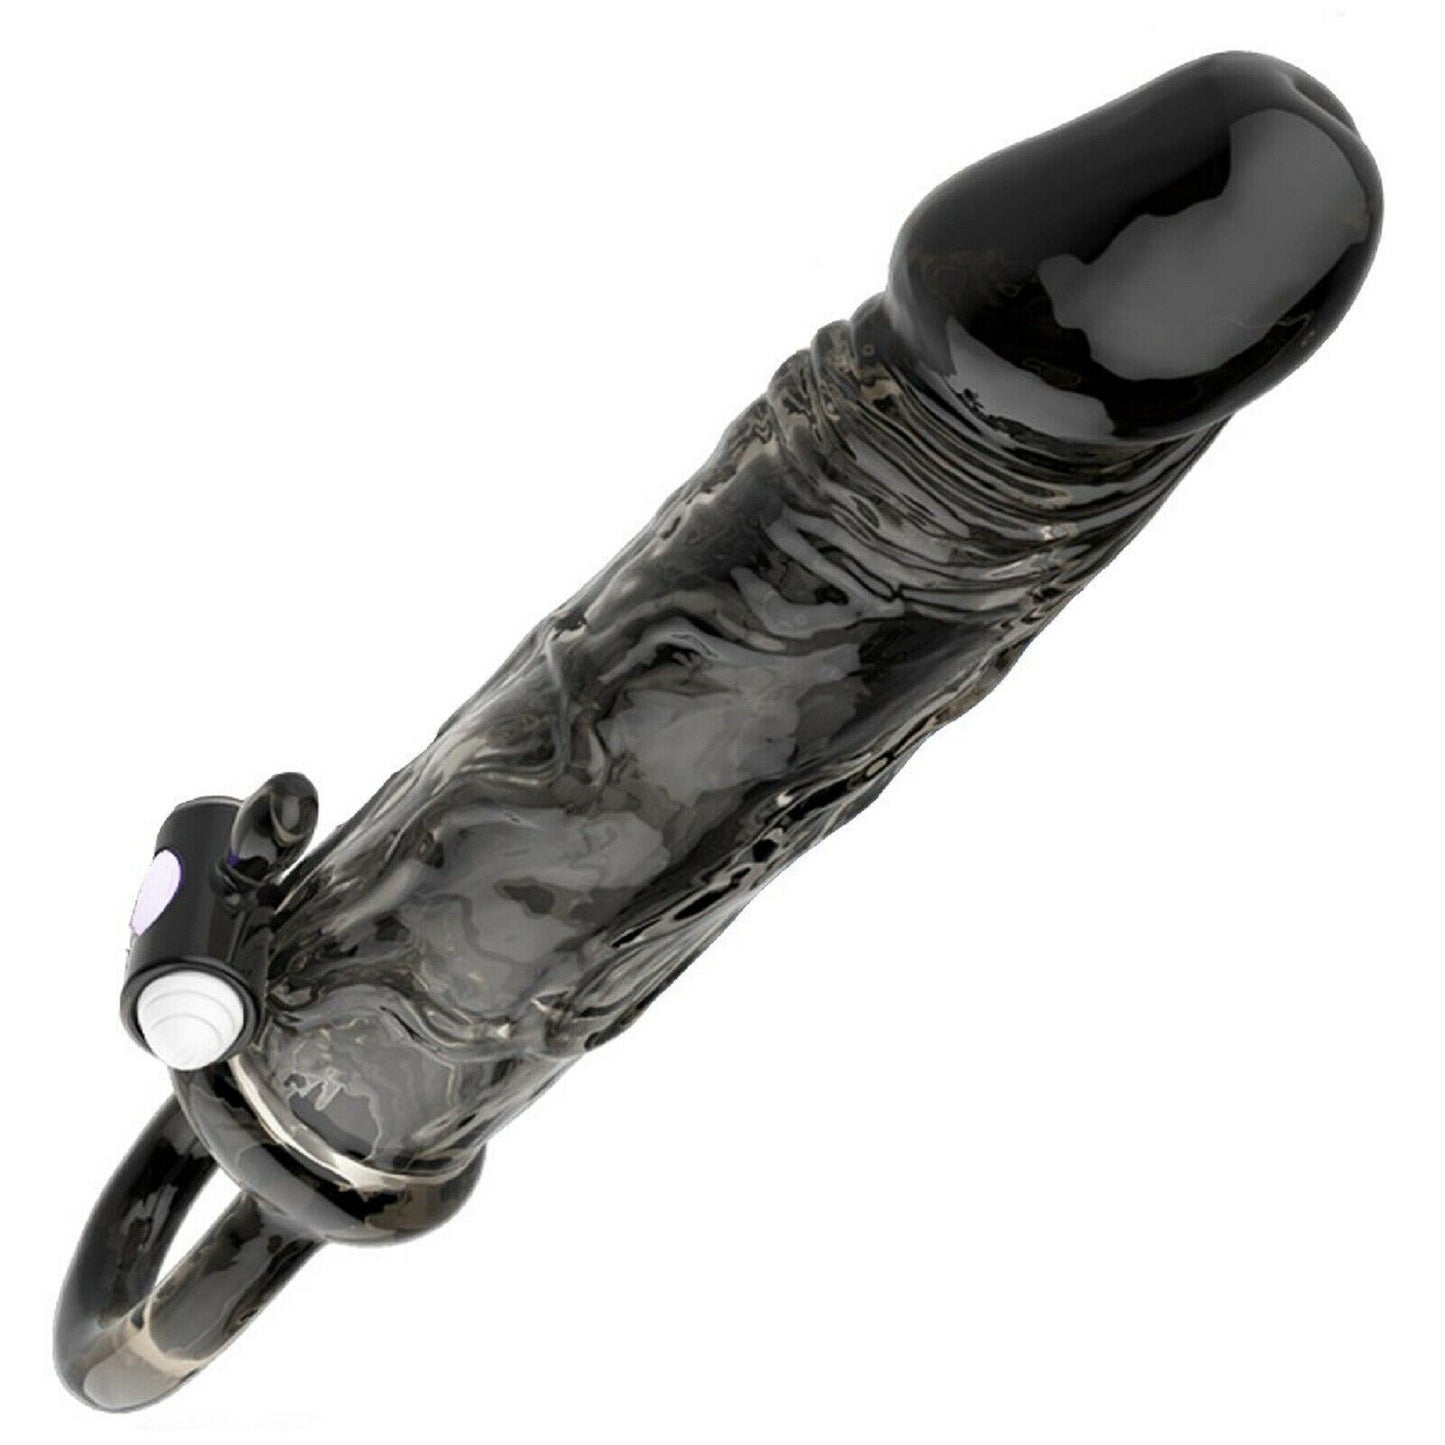 Realistic Penis Extender Sleeve Delay Cock Extension Men Dildo Adult Sex Toy NEW